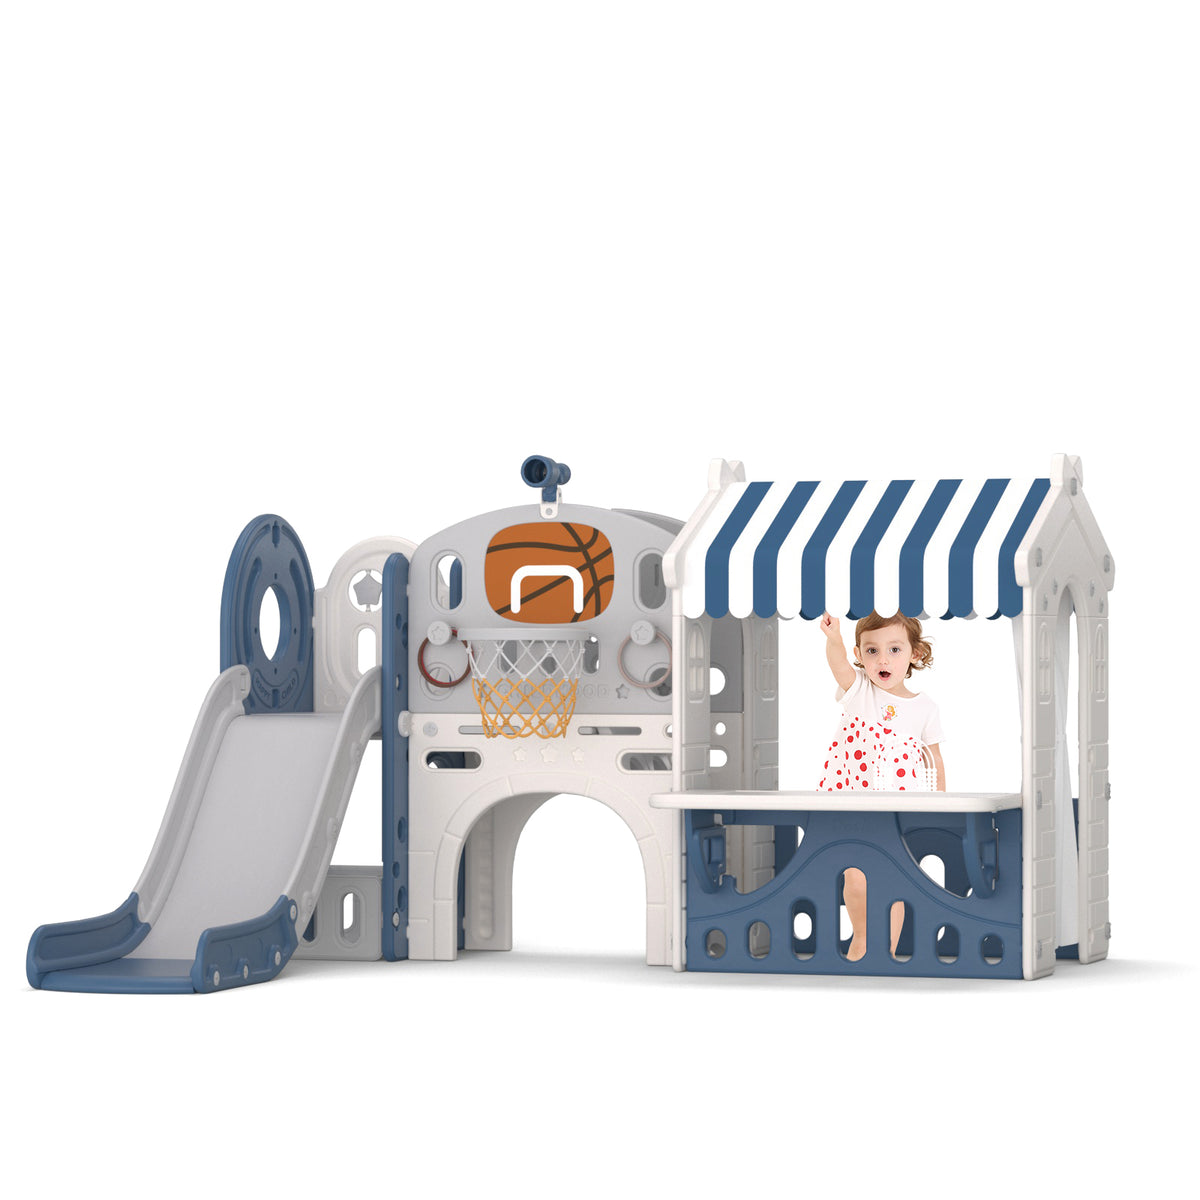 XJD 10 in 1 Toddler Slide with house Indoor and Outdoor Plastic Freestanding Slide, Blue Gray